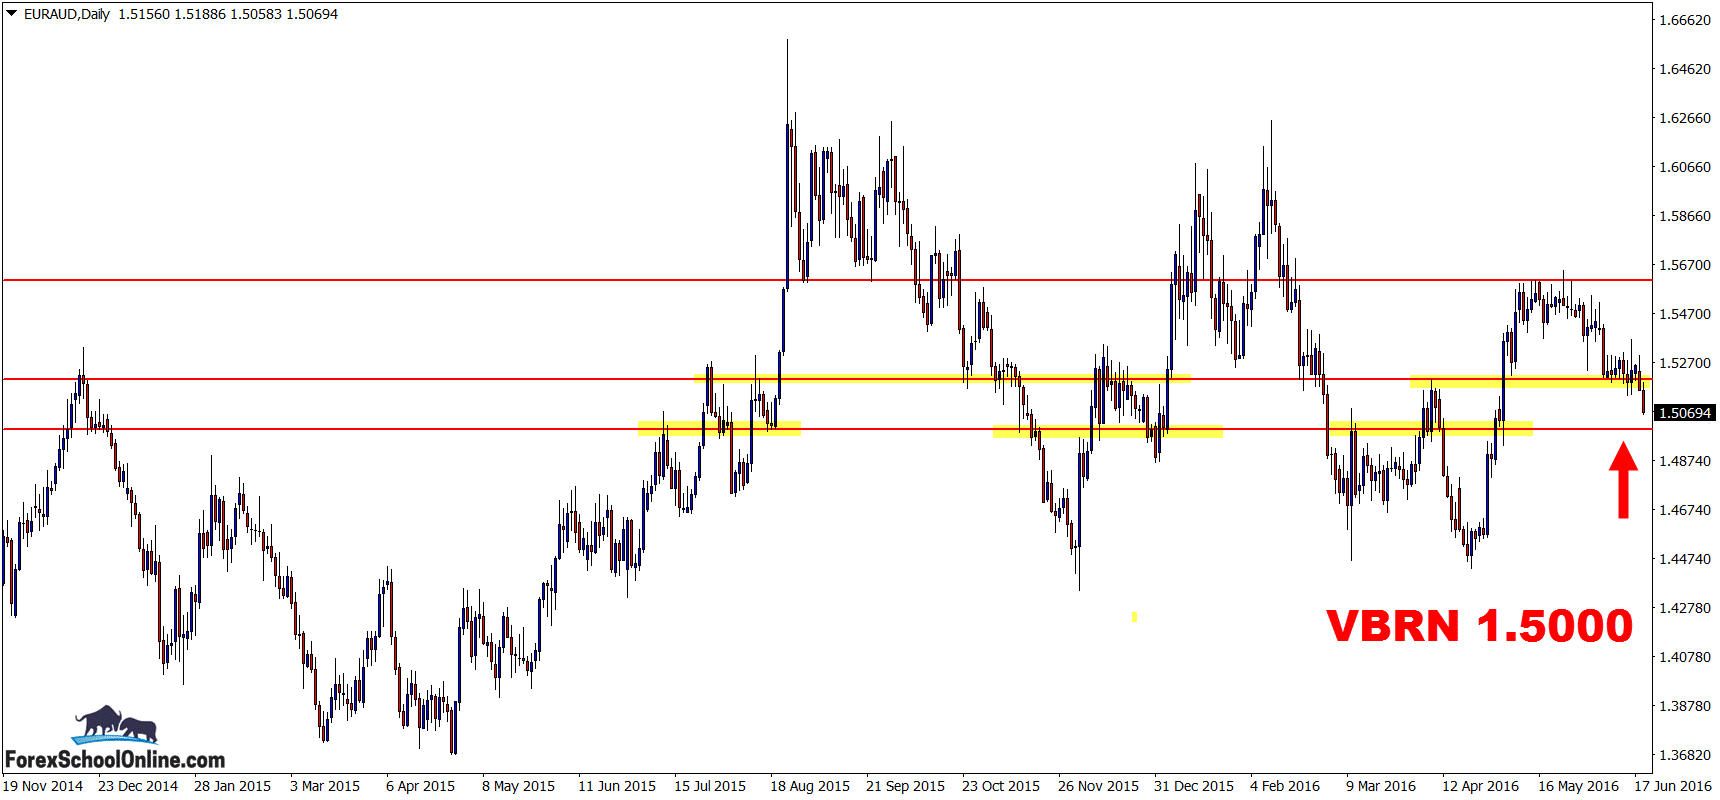 EURAUD ZOOMED OUT